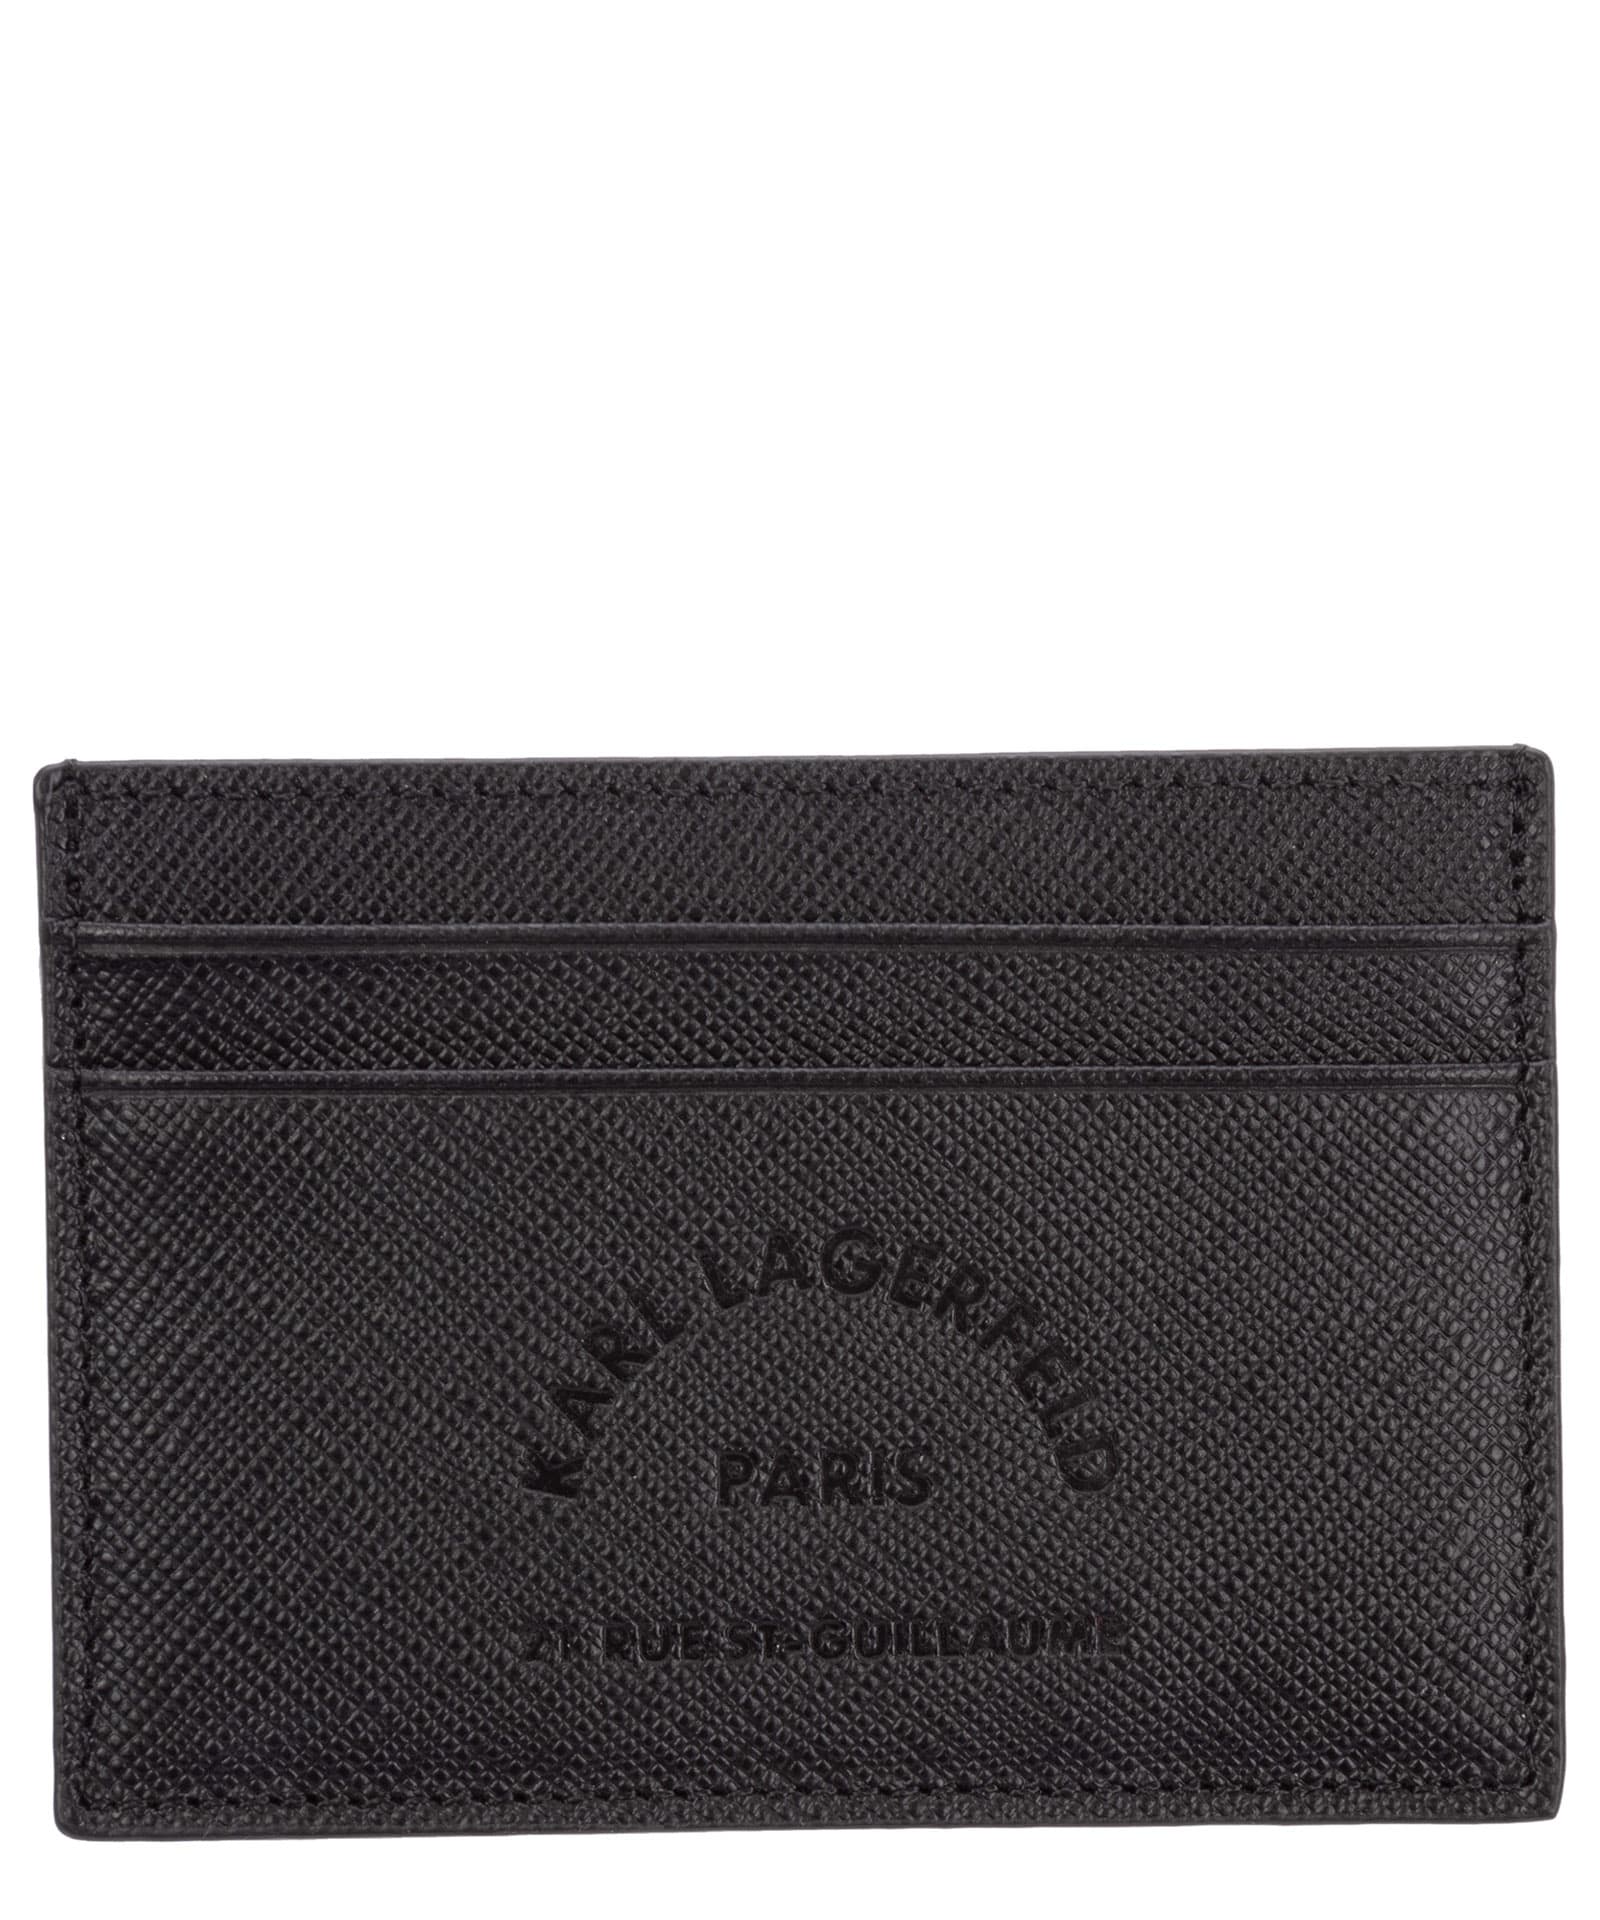 Karl Lagerfeld Rue St Guillaume Leather Credit Card Holder